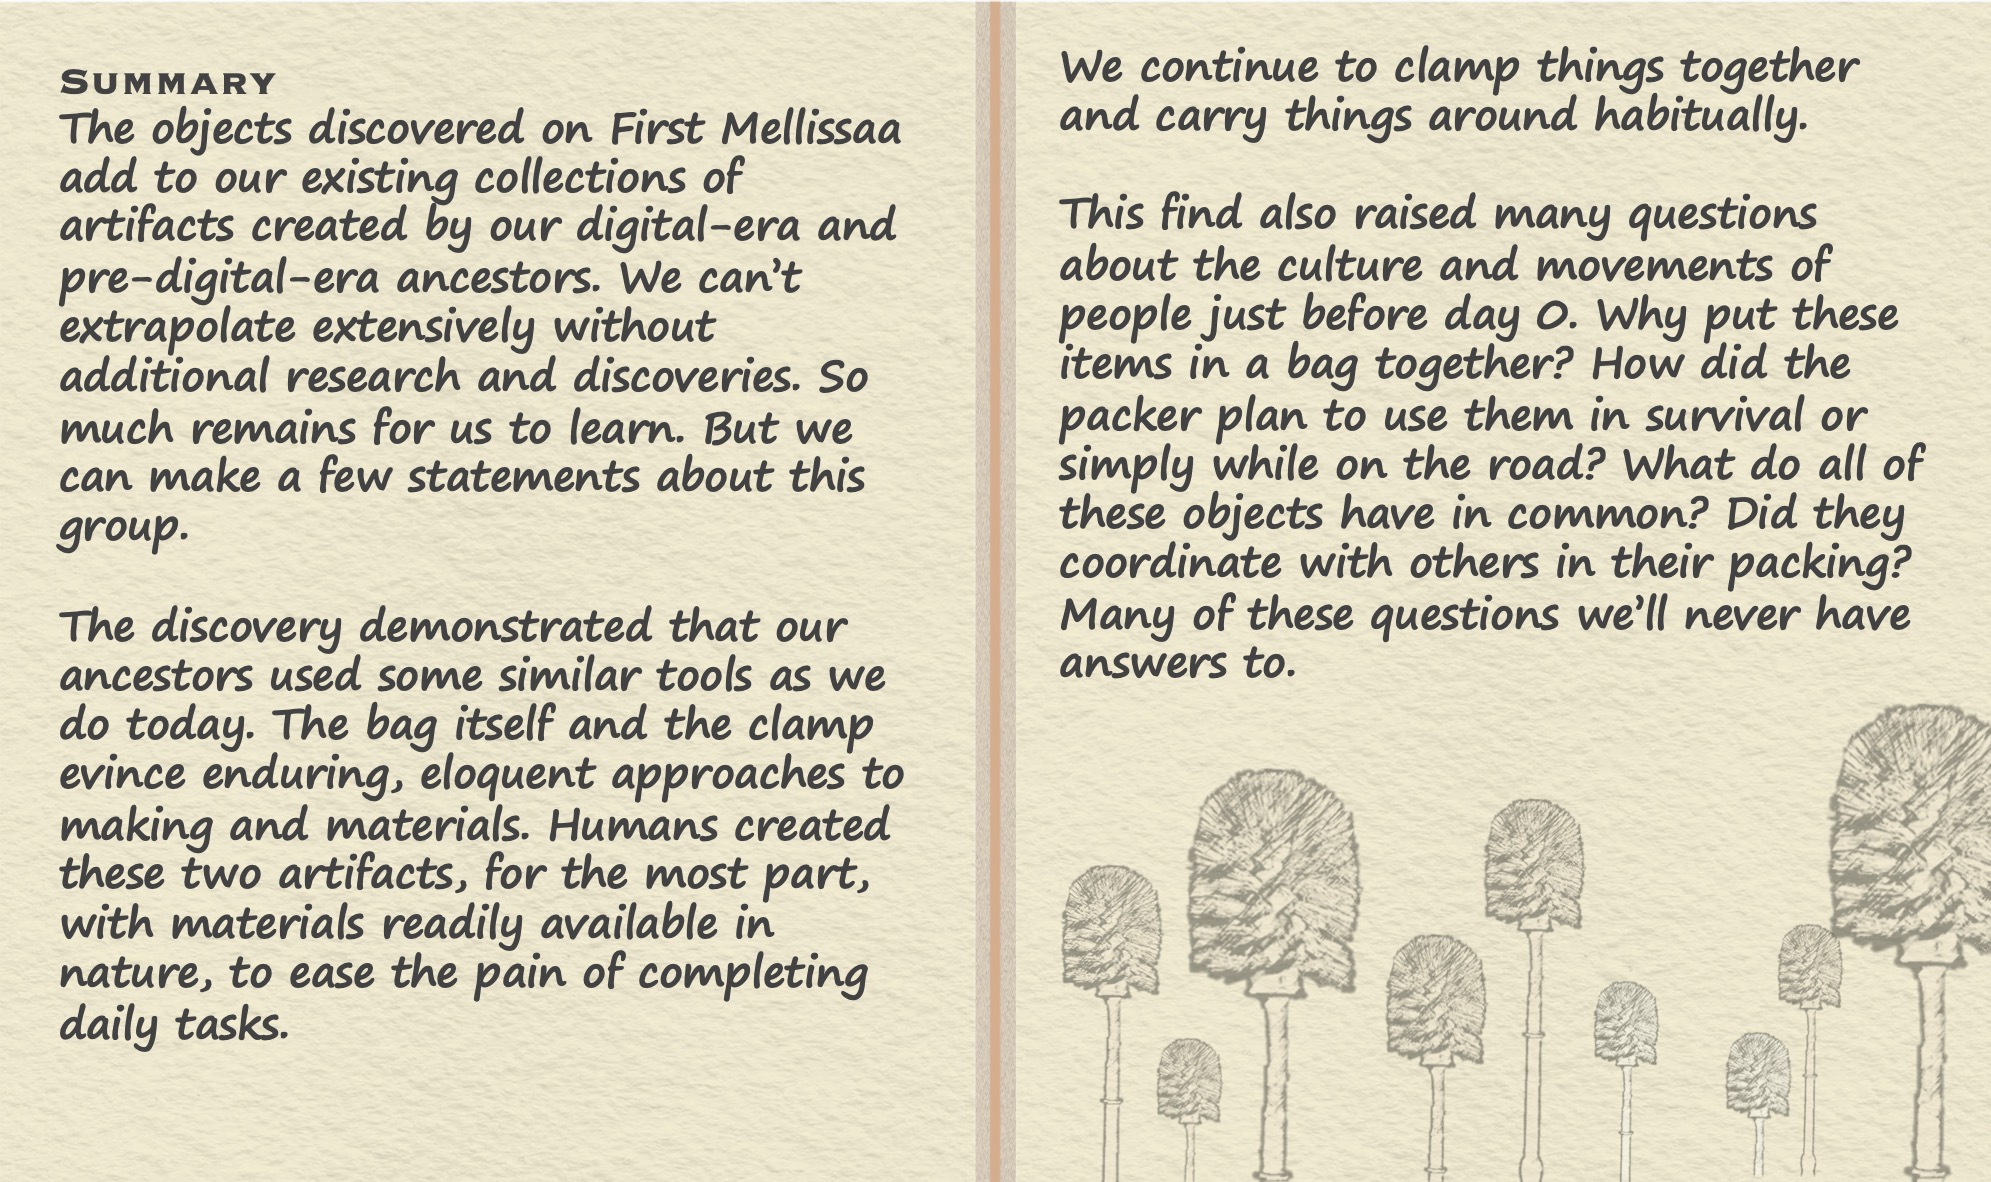 Summary The objects discovered on First Mellissaa add to our existing collections of artifacts created by our digital-era and pre-digital-era ancestors. We can’t extrapolate extensively without additional research and discoveries. So much remains for us to learn. But we can make a few statements about this group. The discovery demonstrated that our ancestors used some similar tools as we do today. The bag itself and the clamp evince enduring, eloquent approaches to making and materials. Humans created these two artifacts, for the most part, with materials readily available in nature, to ease the pain of completing daily tasks. We continue to clamp things together and carry things around habitually. This find also raised many questions about the culture and movements of people just before day 0. Why put these items in a bag together? How did the packer plan to use them in survival or simply while on the road? What do all of these objects have in common? Did they coordinate with others in their packing? Many of these questions we’ll never have answers to.